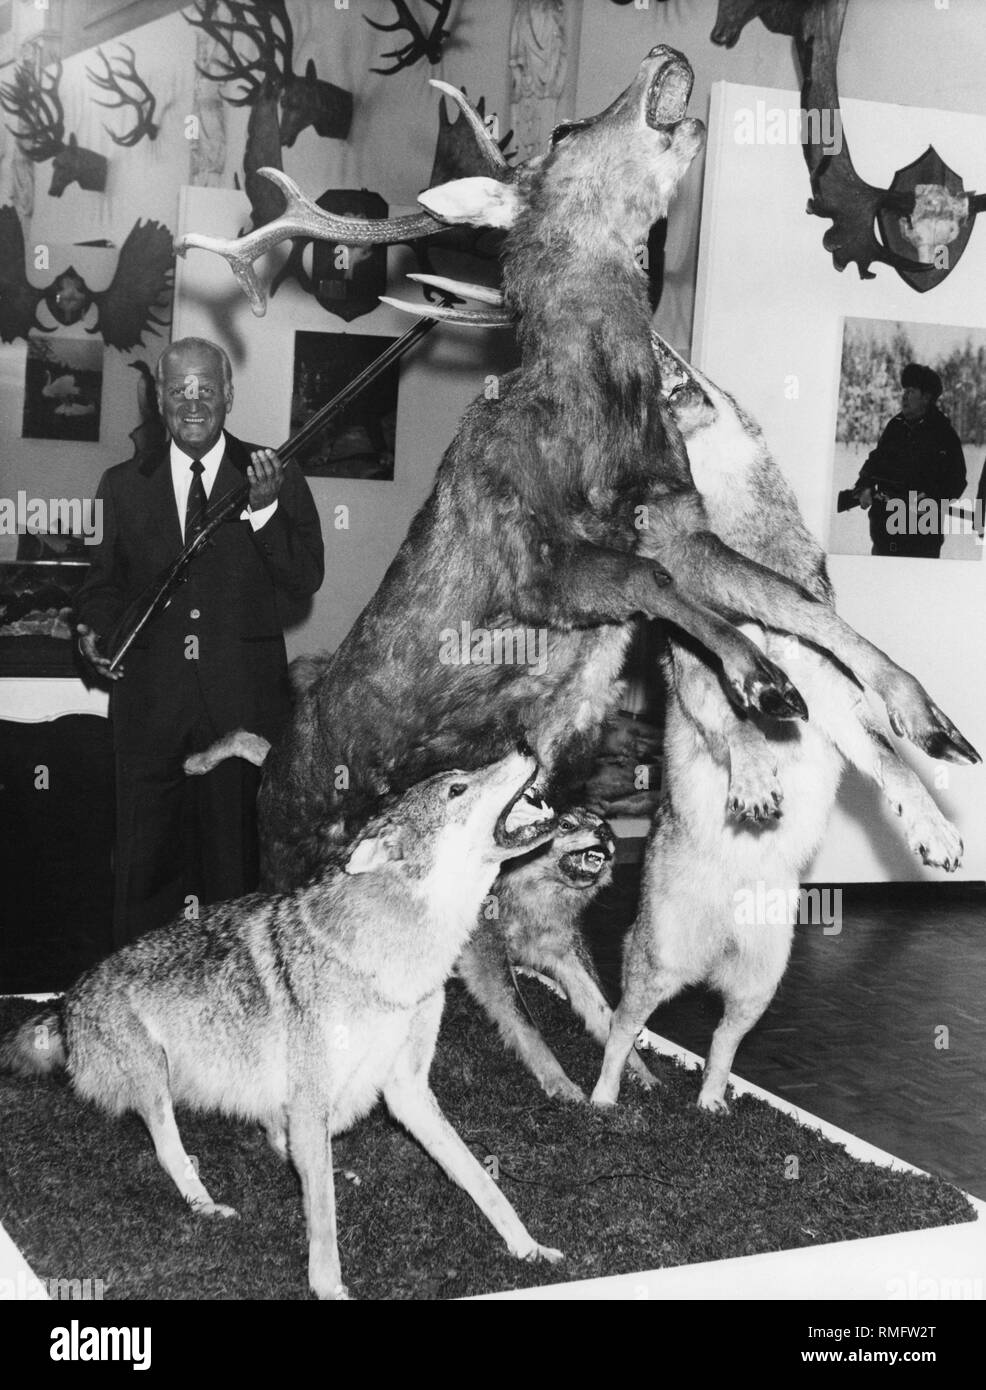 Director of the German Hunting and Fishing Museum Horst Popp presents a shotgun at the opening of the special exhibition 'Jagd und Fauna in der UdSSR' ('Hunting and Fauna in the USSR') in the Weisser saal  (White Hall). In the foreground, a pack of wolves tearing a red deer. Stock Photo